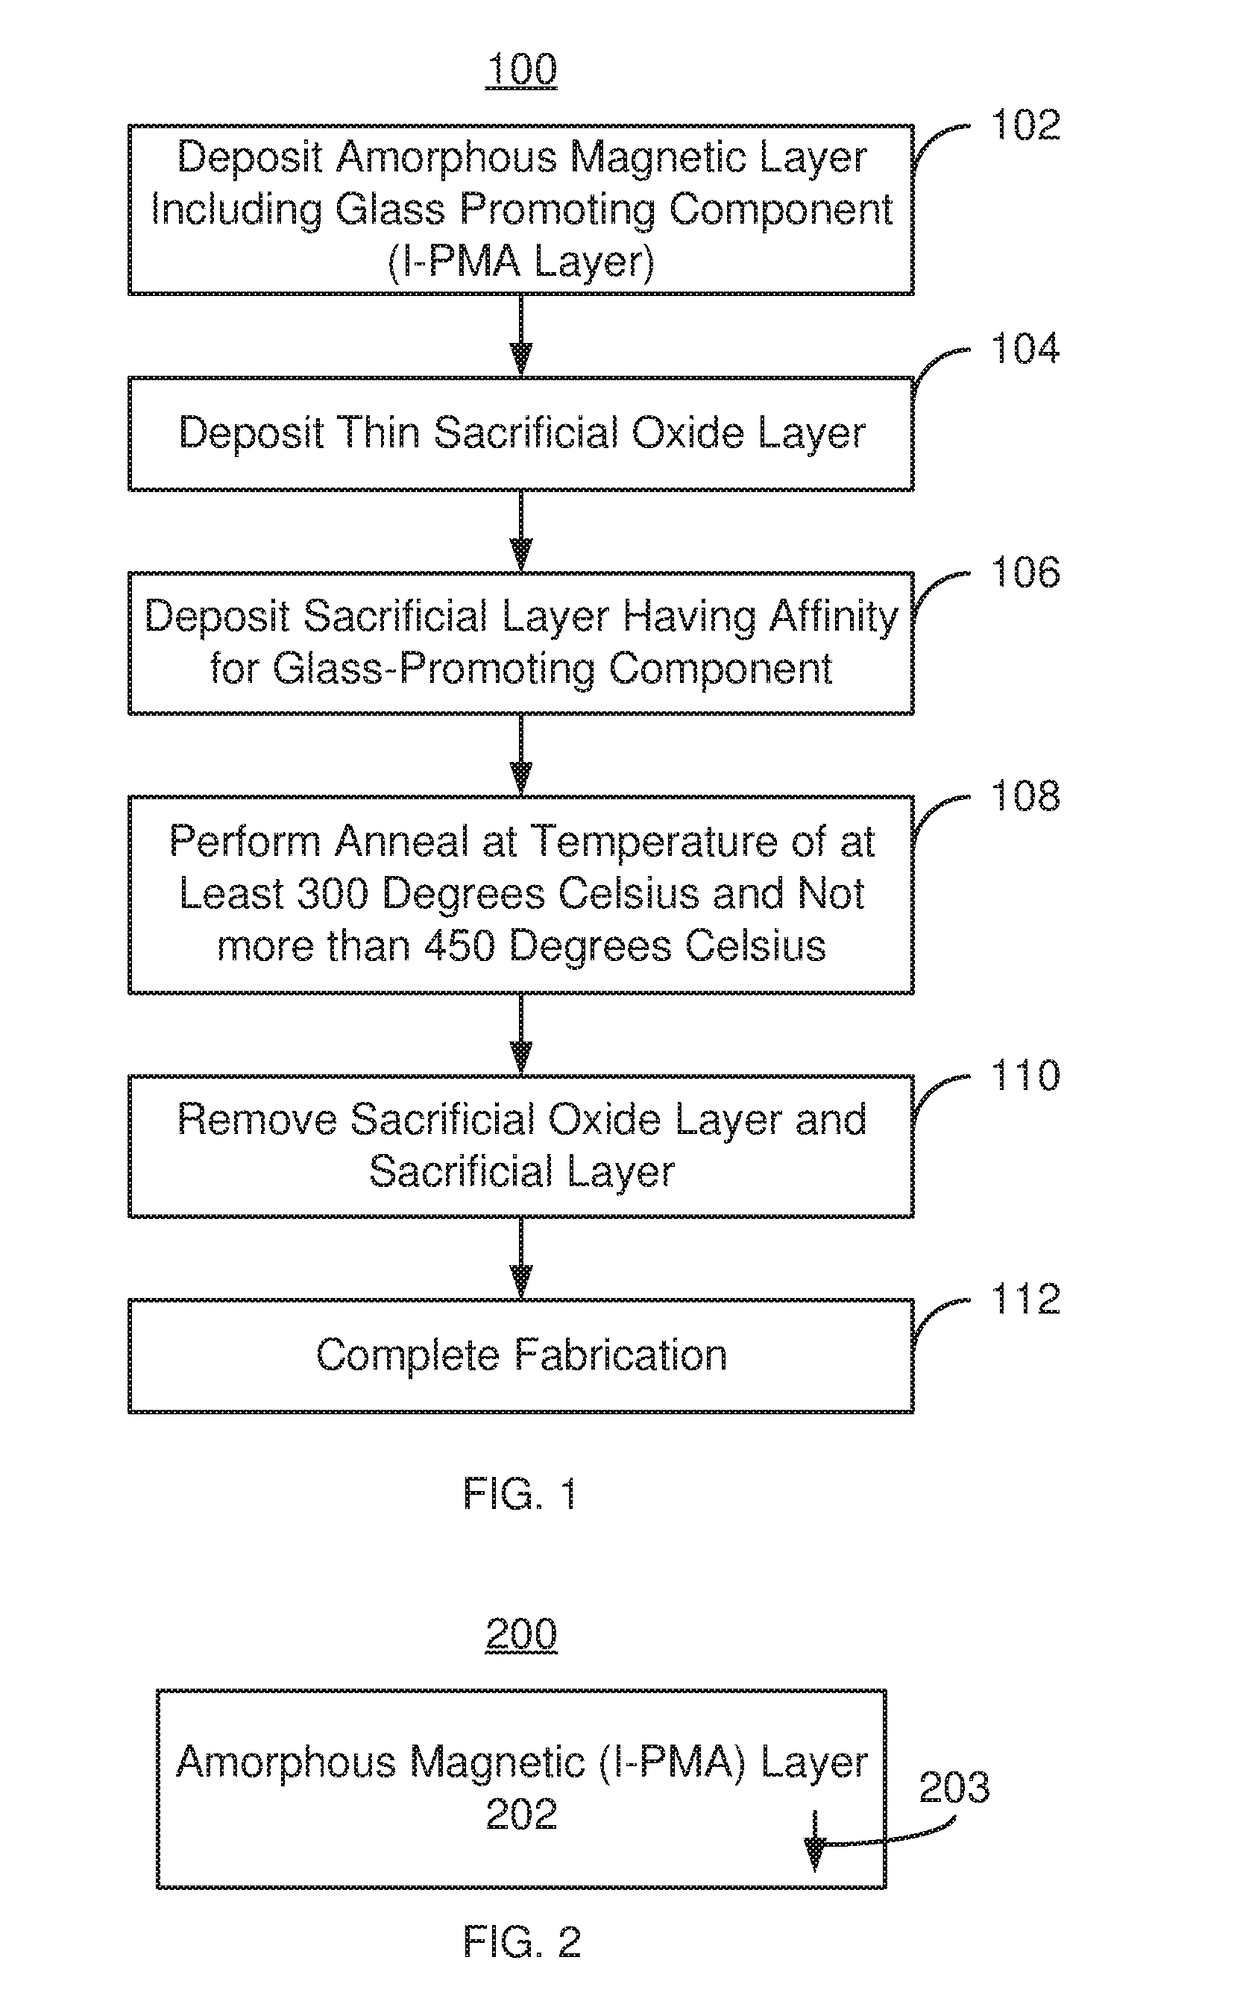 Method and system for providing a magnetic layer in a magnetic junction usable in spin transfer or spin orbit torque applications using a sacrificial oxide layer